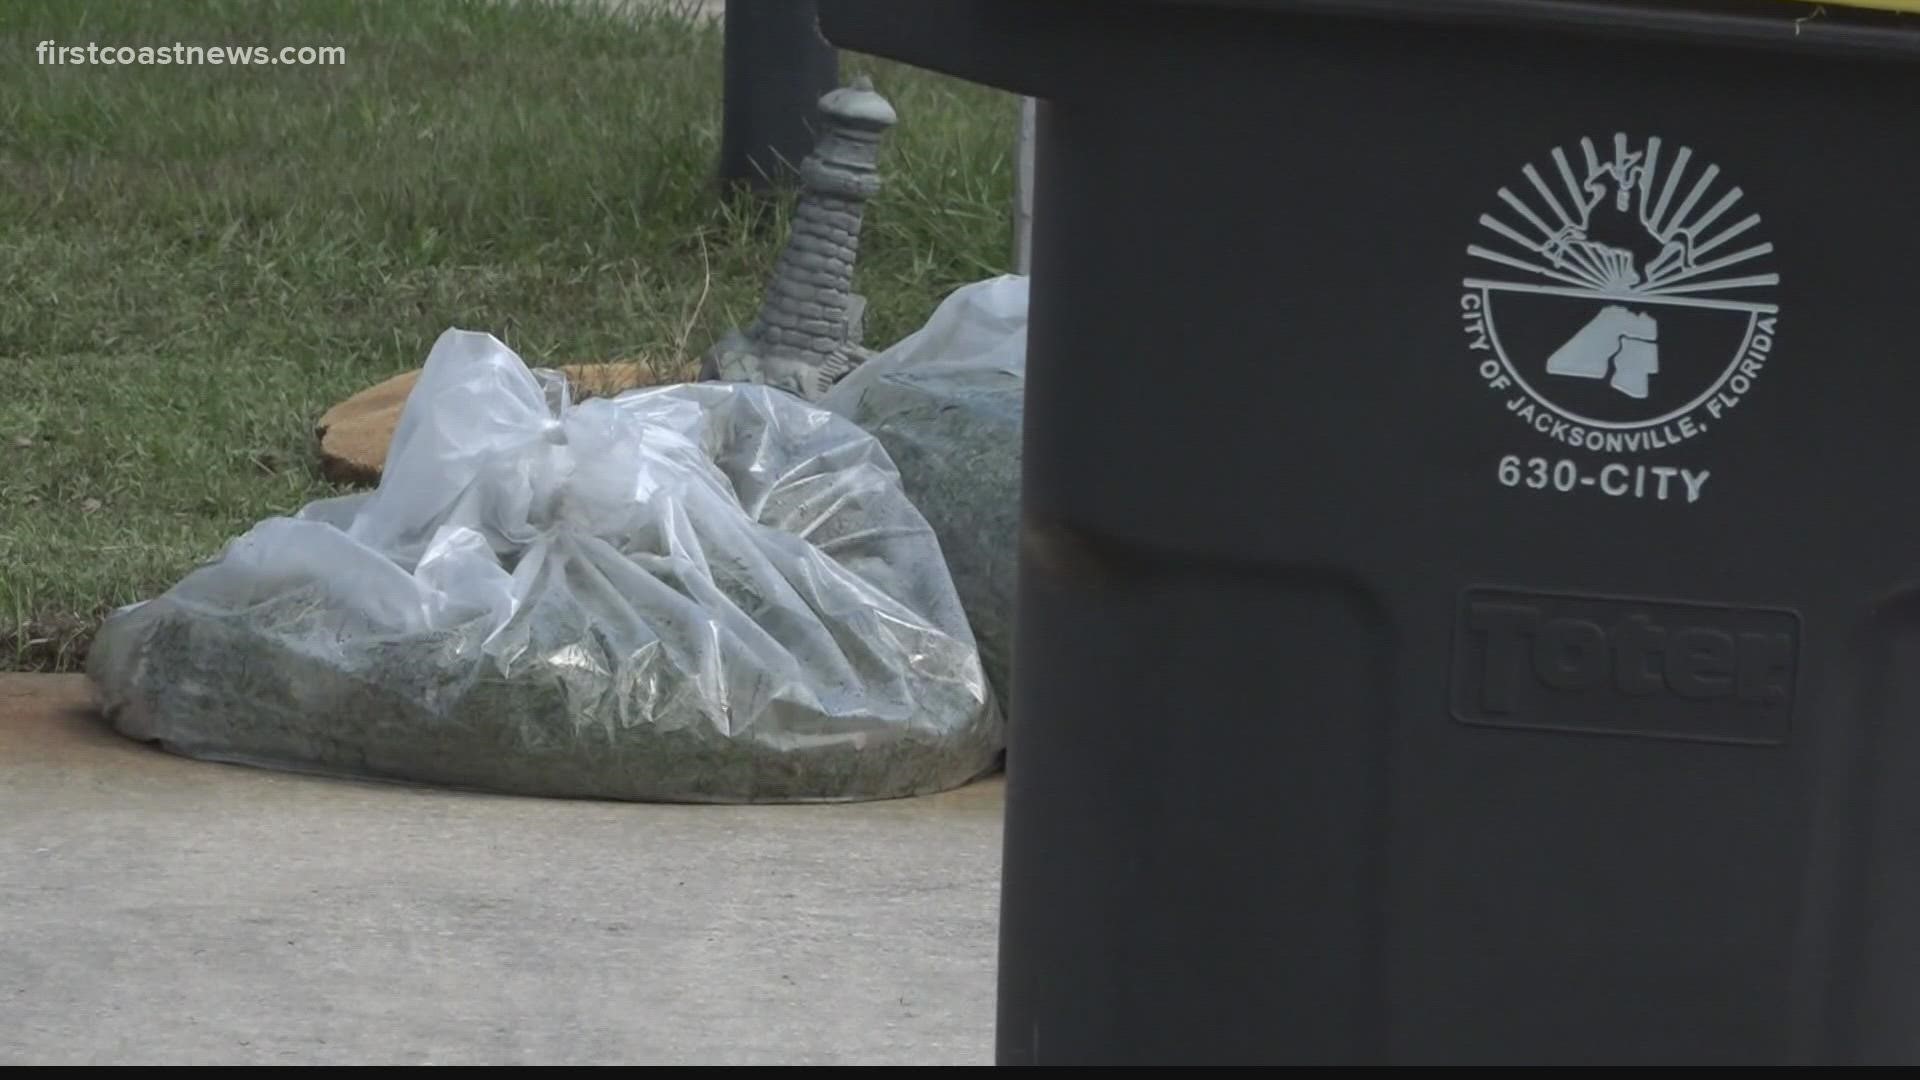 In order to deal with mounting yard debris around the city, Jacksonville's mayor said he wants to temporarily suspend the city's recycling program.